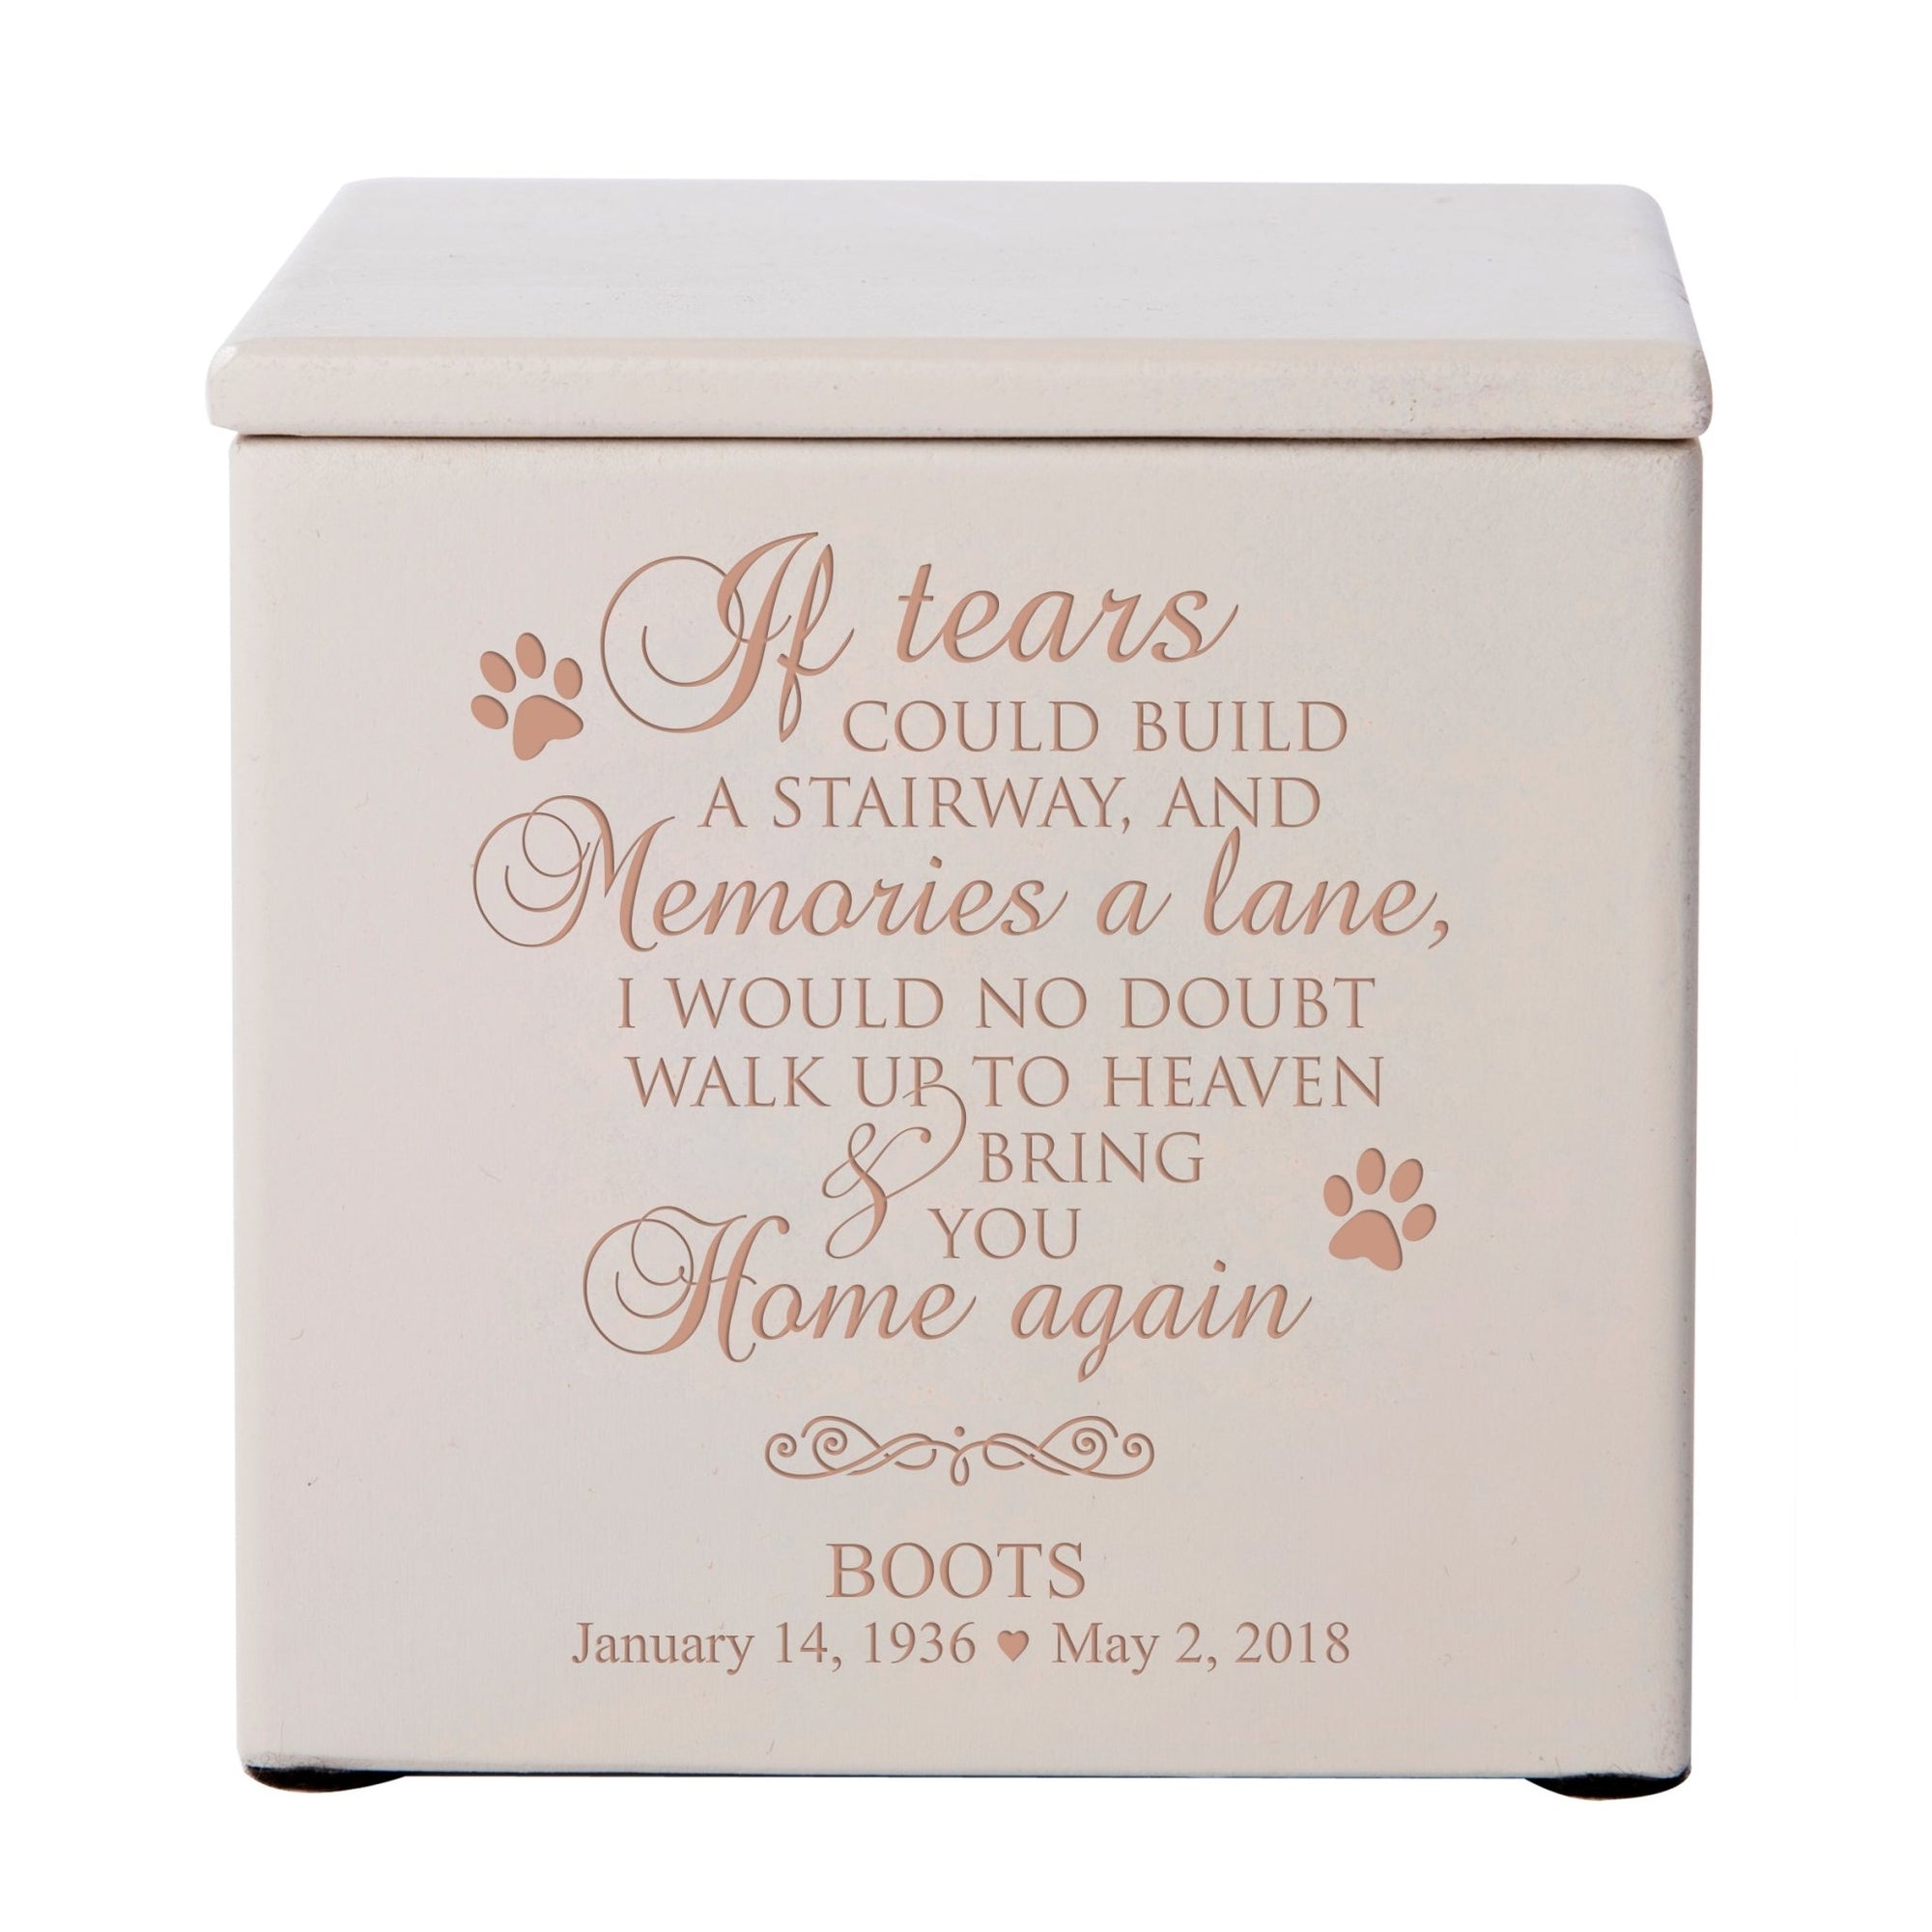 Personalized Pet Memorial Wooden Keepsake Cremation Urn Box for Dog or Cat